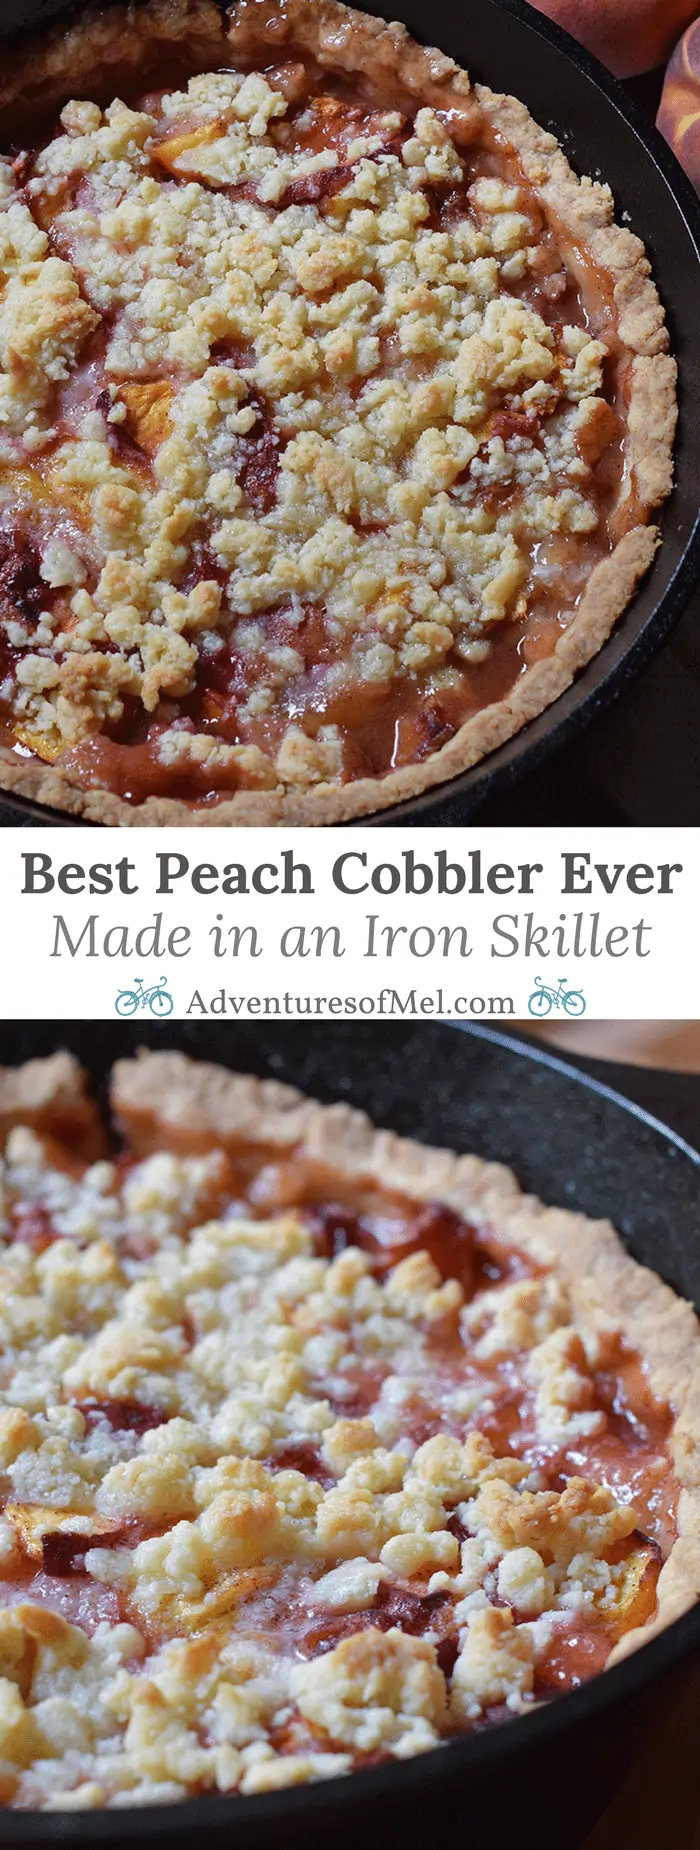 Peach cobbler is probably the easiest dessert recipe you could ever make, besides chocolate chip cookies. Ingredients are simple, and the crust is a press-in crust, my favorite type of pie crust! Grab the recipe, bake it up in your favorite cast iron skillet (or baking dish), serve with vanilla ice cream, and watch it disappear.